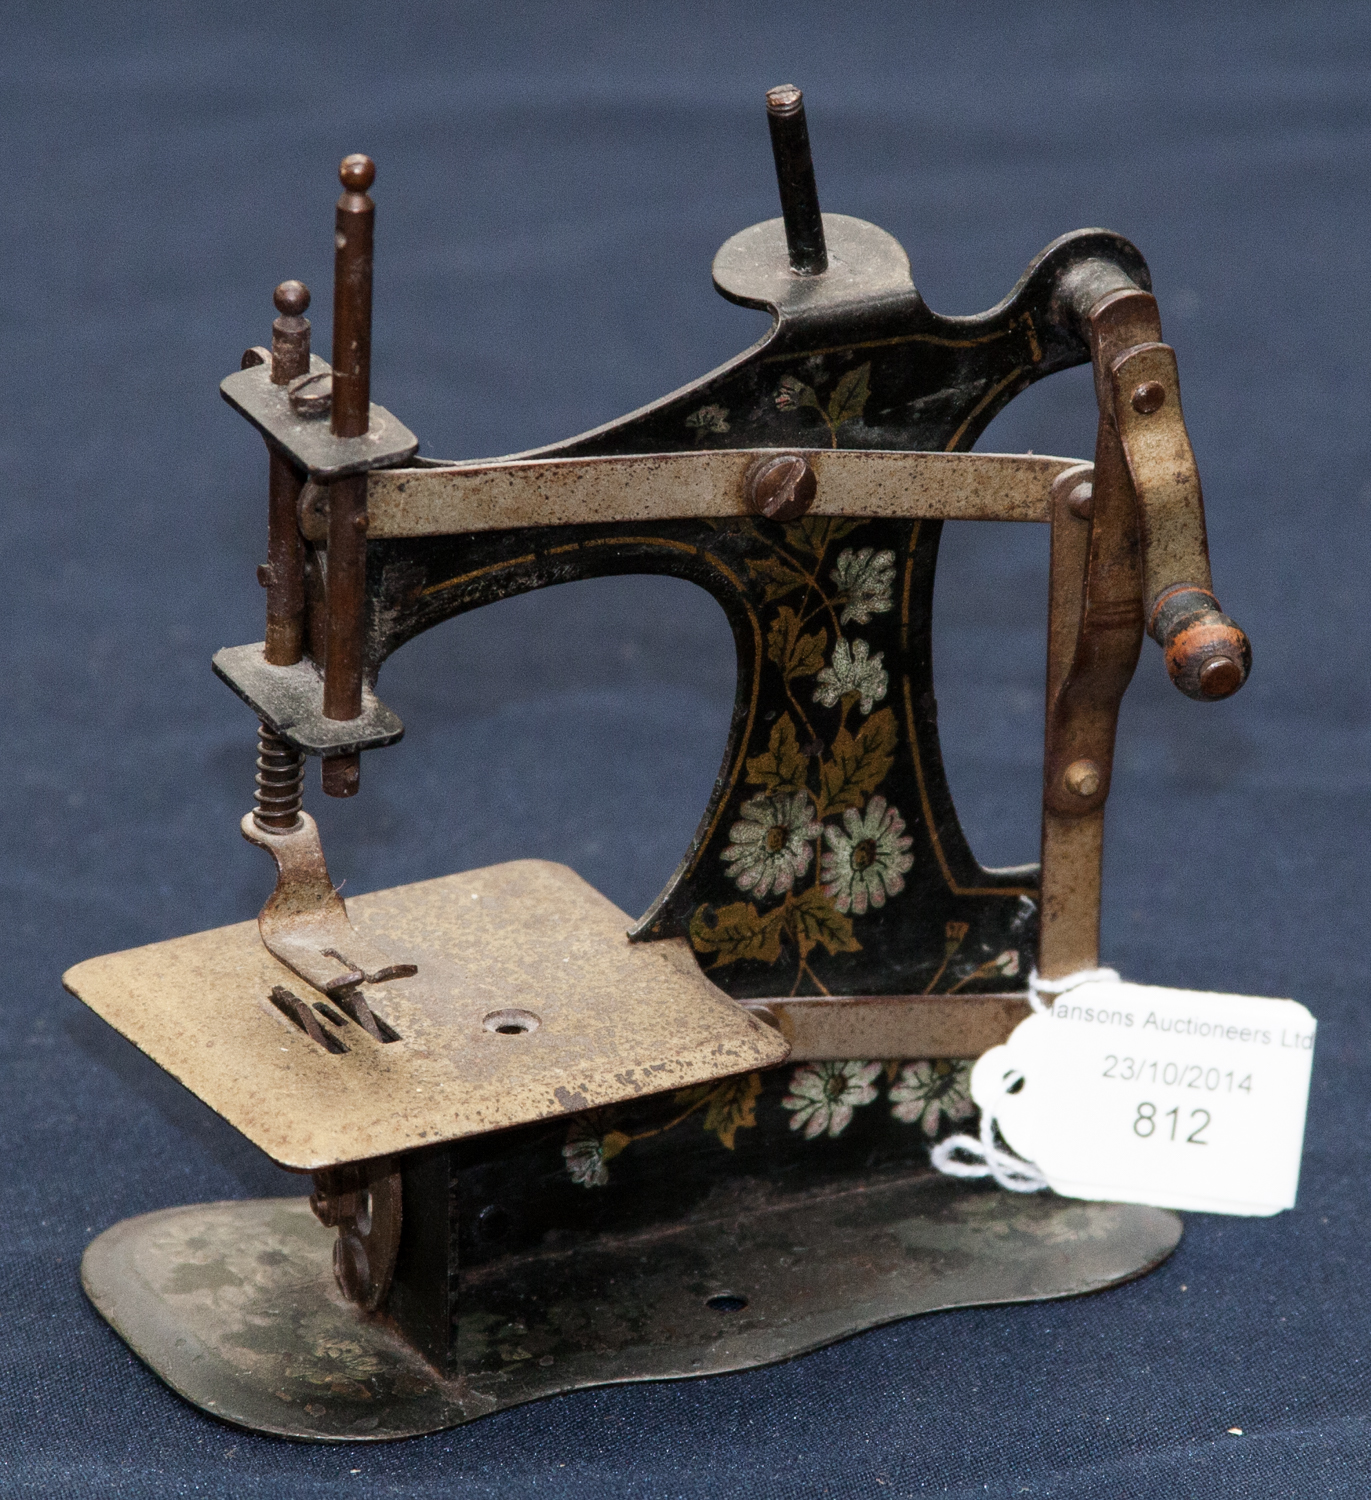 A mid 20th Century miniature toy sewing machine, with floral decoration